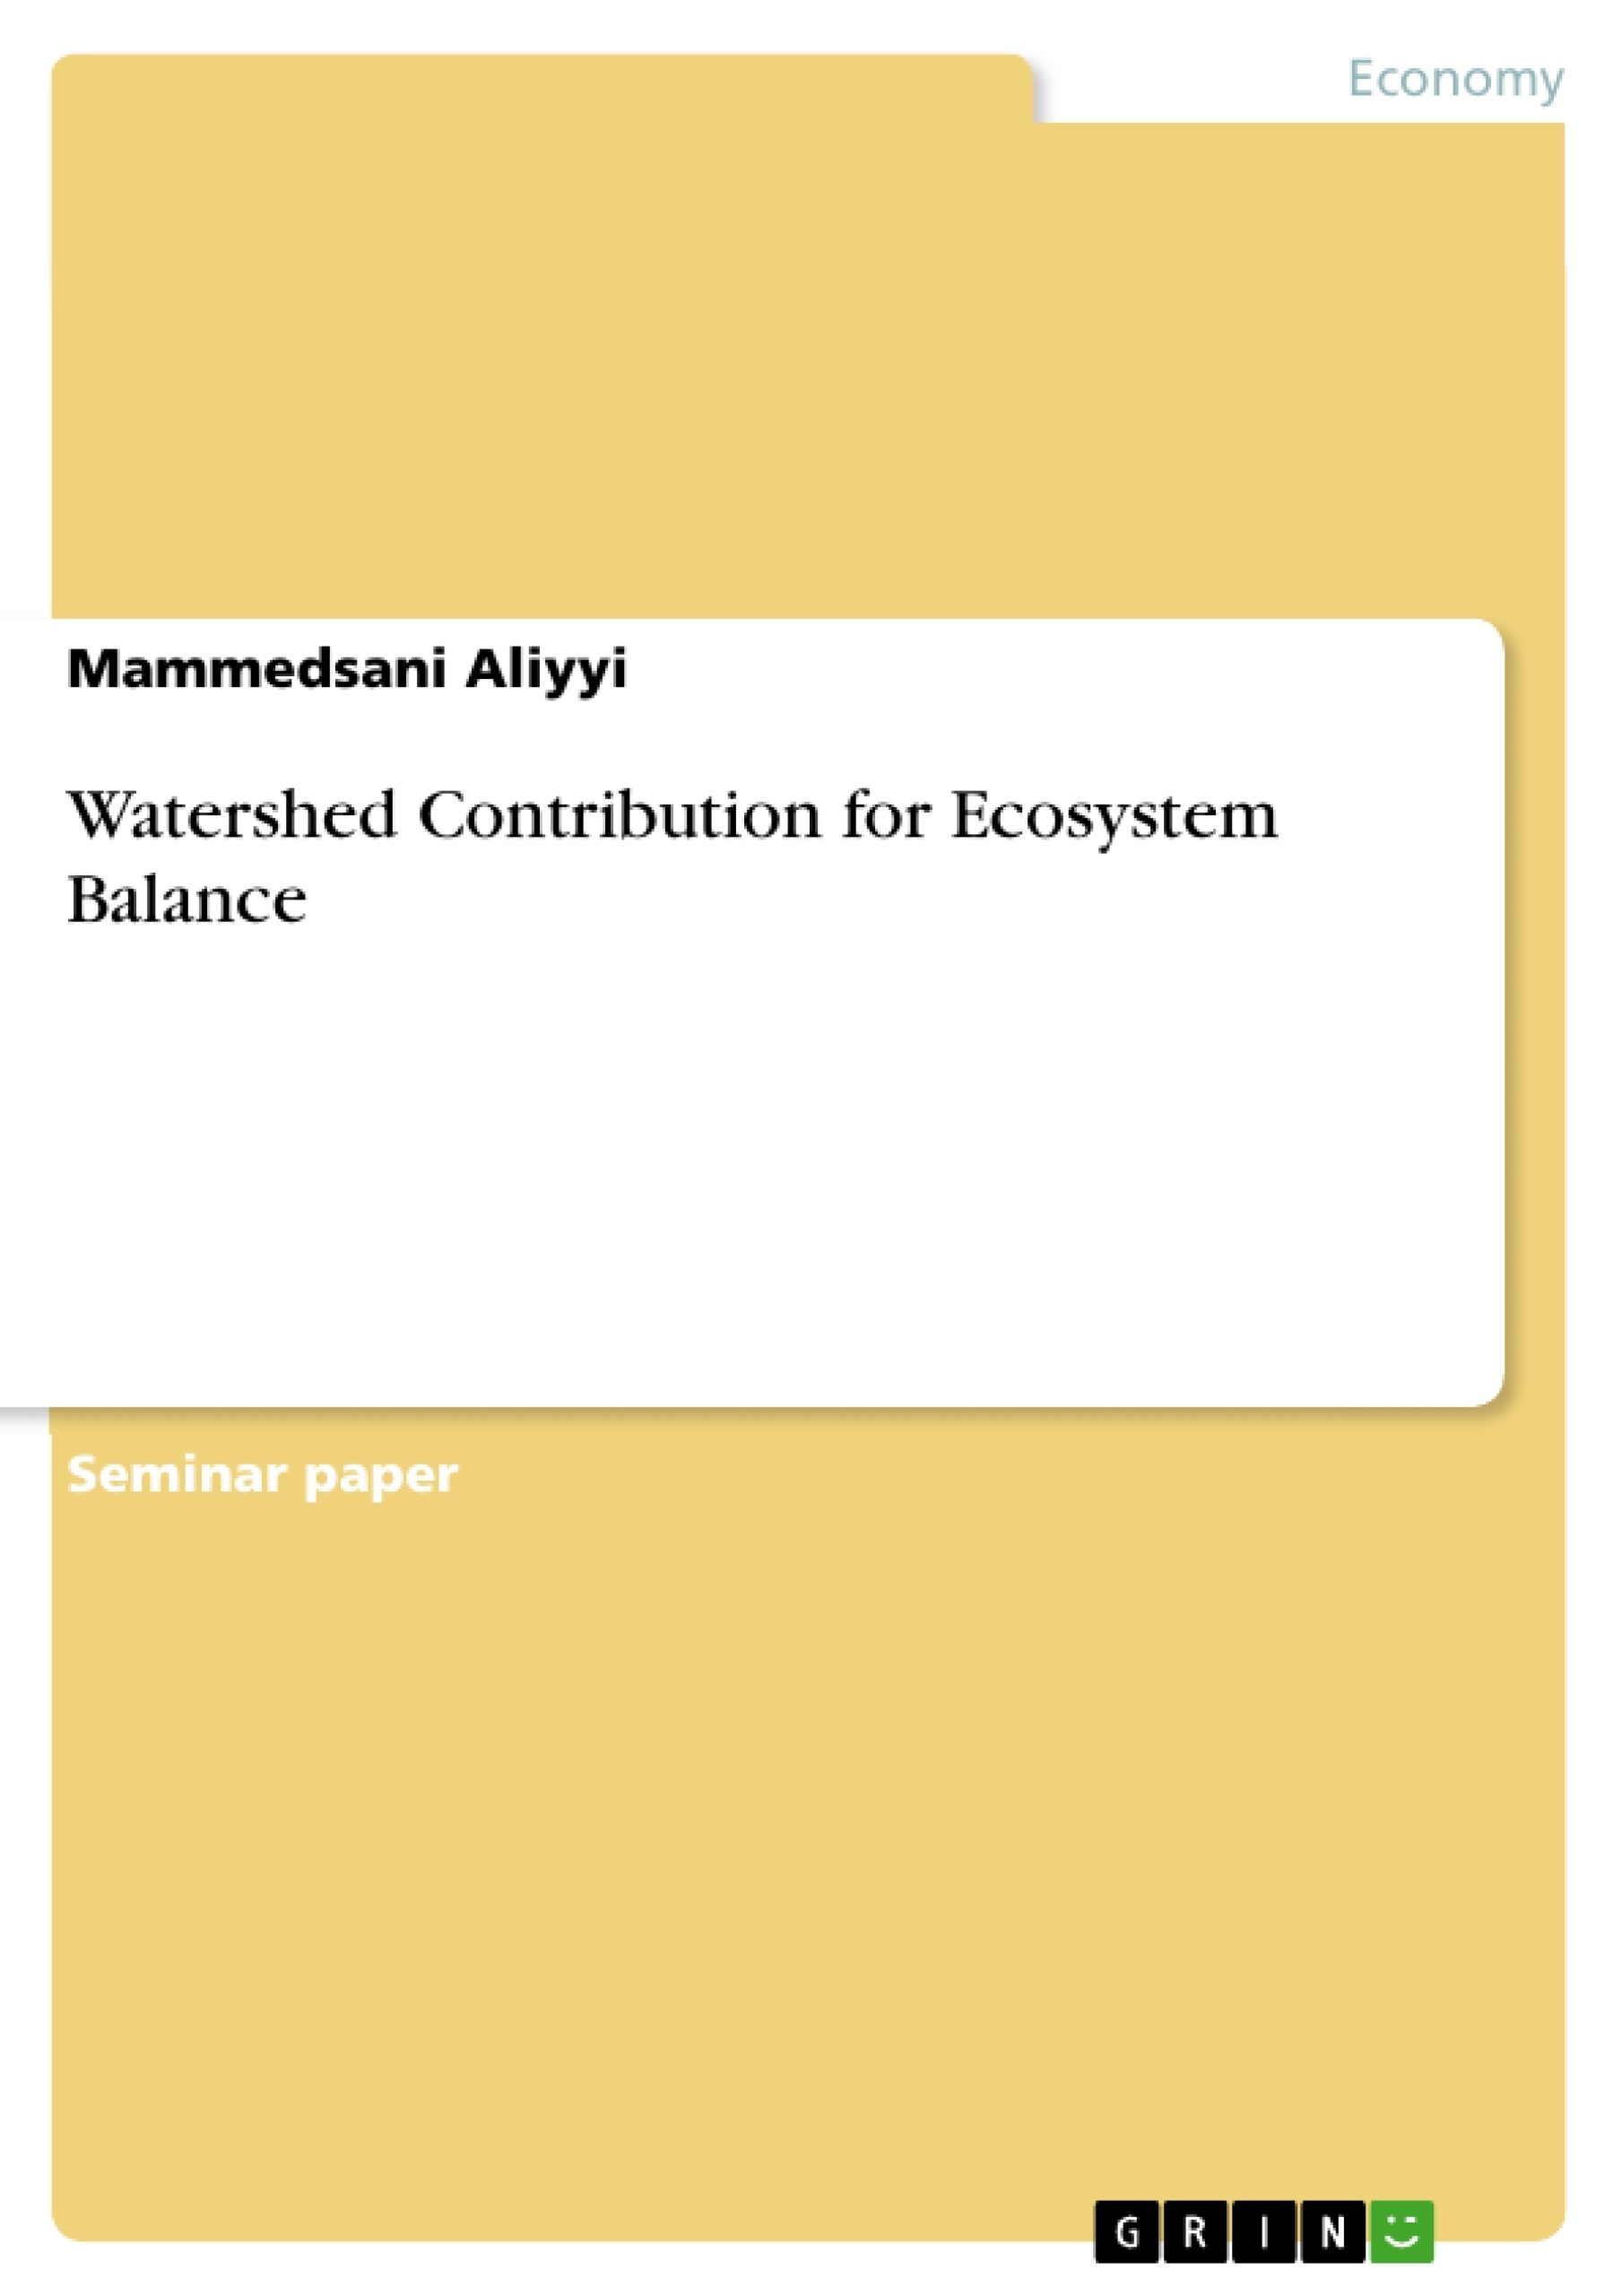 Title: Watershed Contribution for Ecosystem Balance